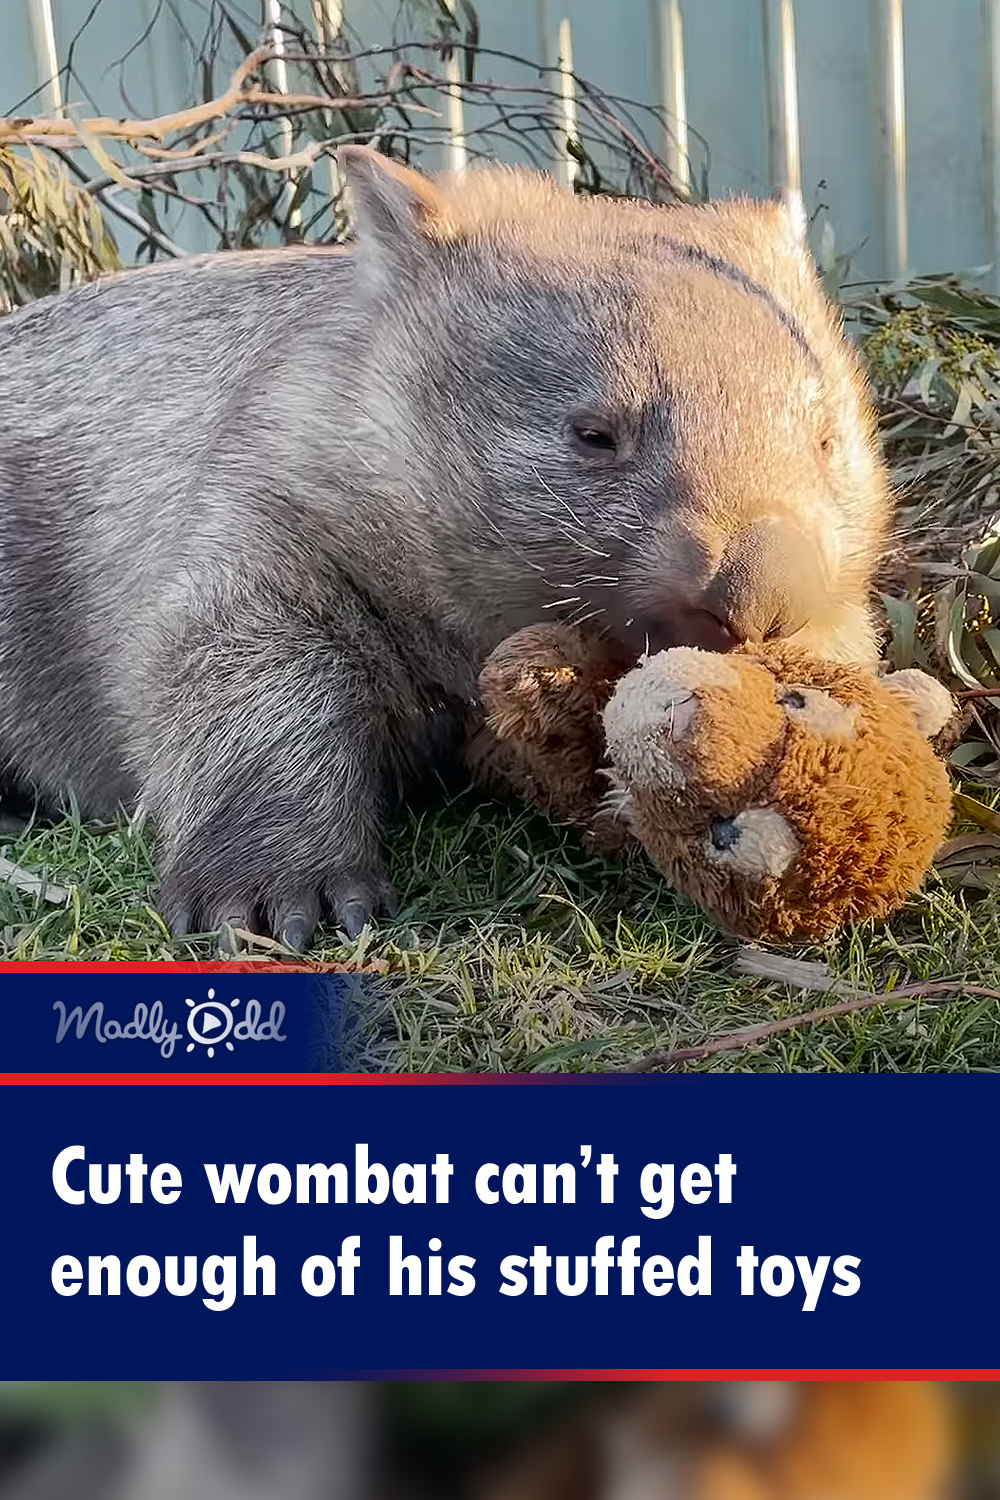 Cute wombat can’t get enough of his stuffed toys